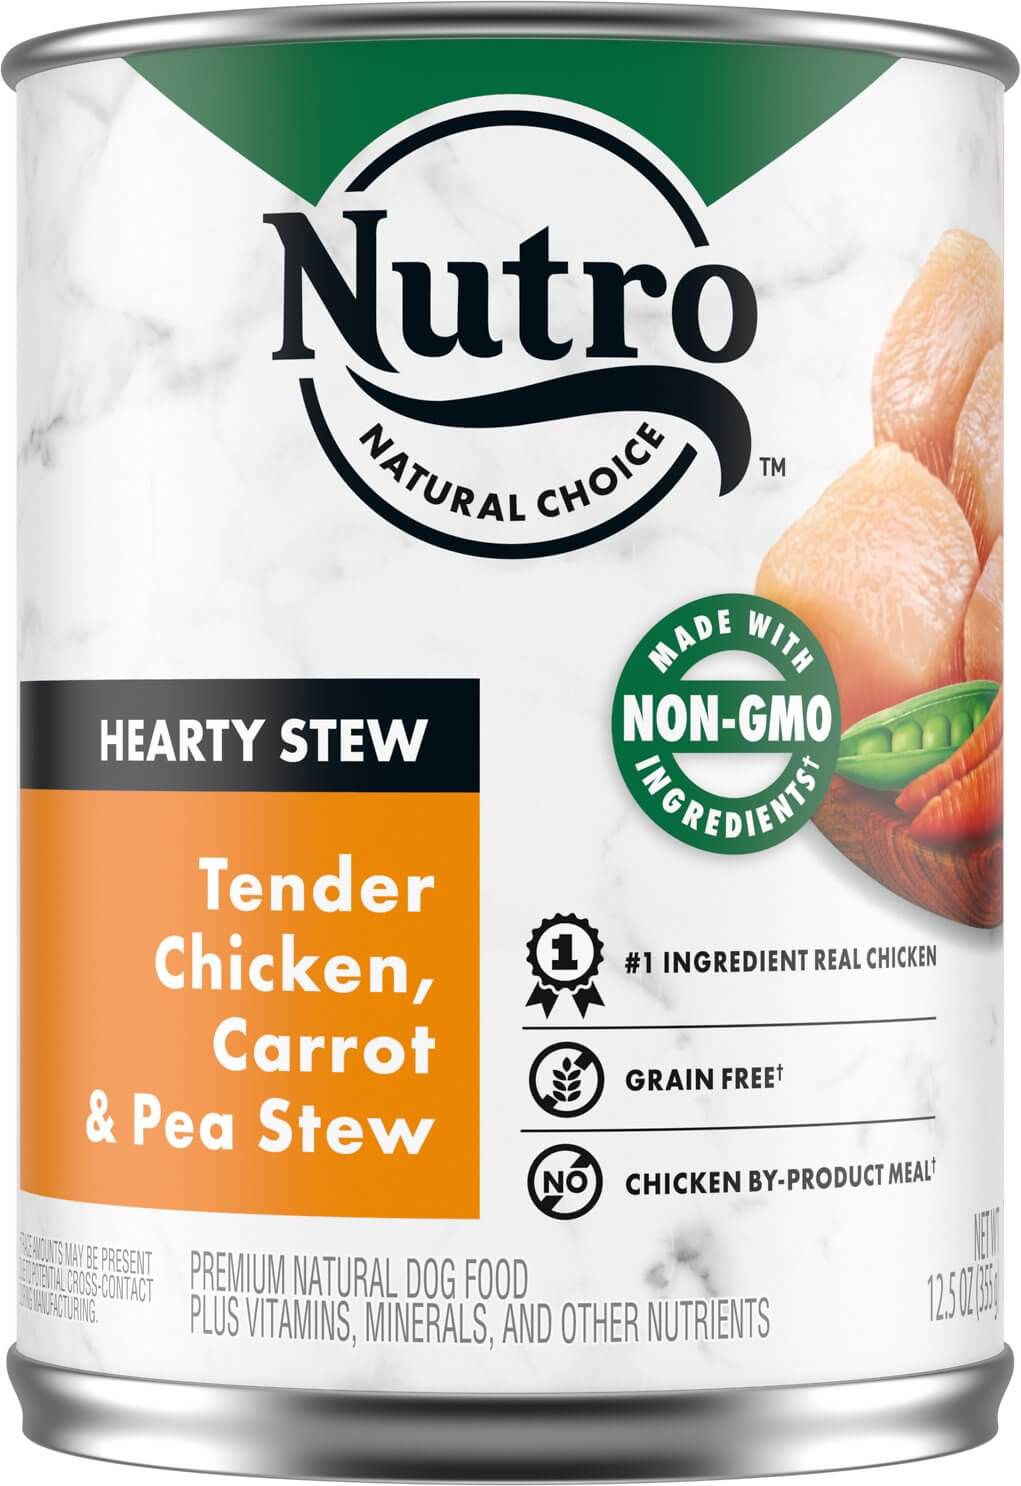 Nutro Hearty Stew Dog Food Review (Canned)